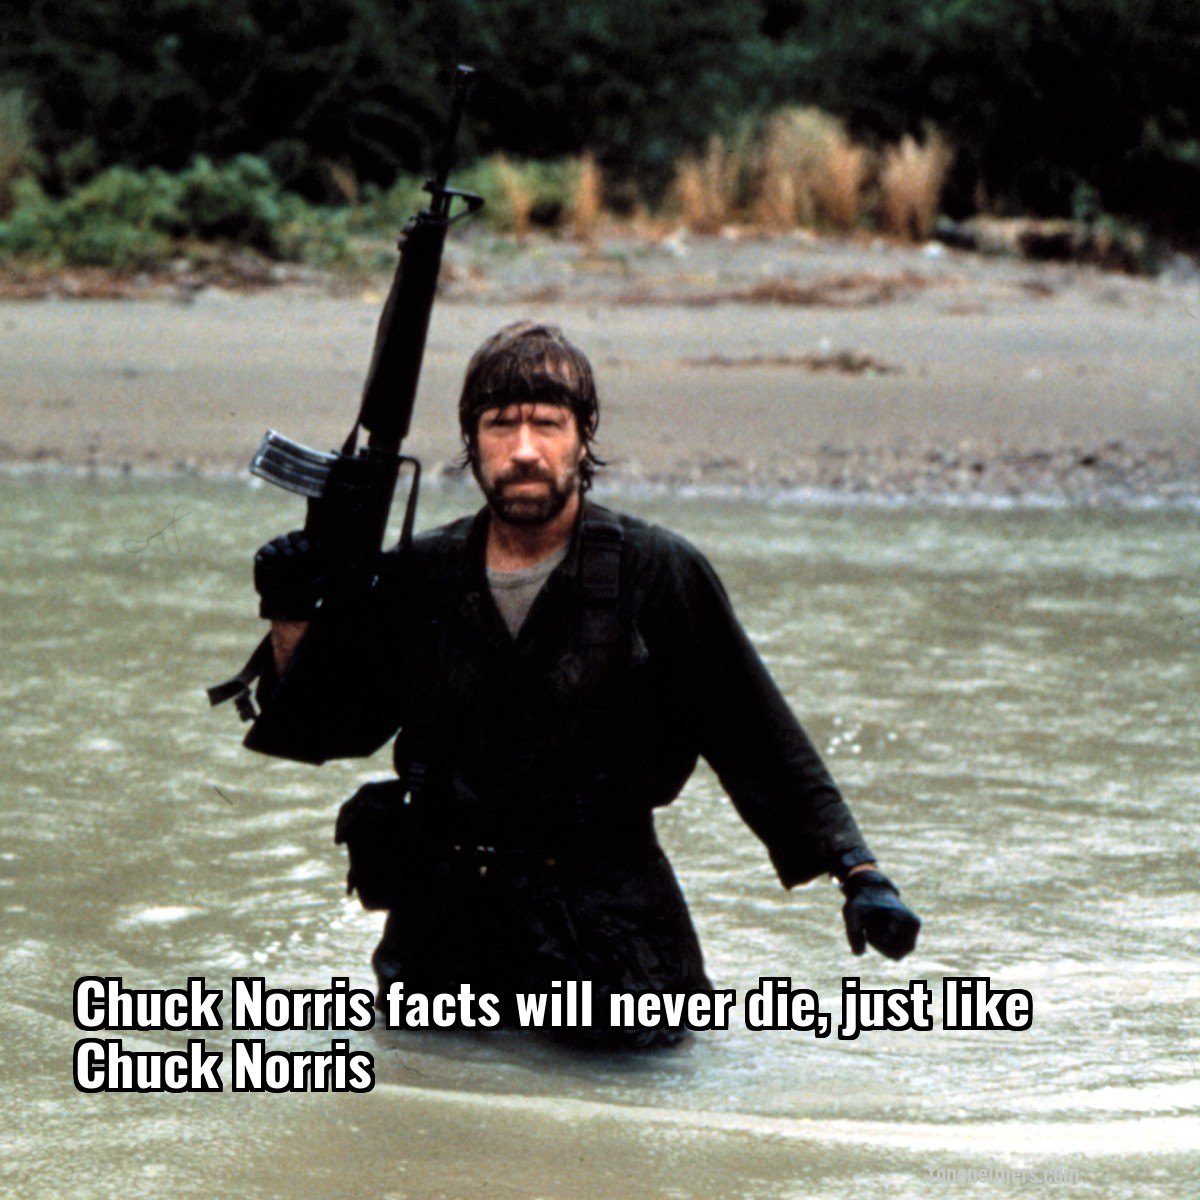 Chuck Norris facts will never die, just like Chuck Norris